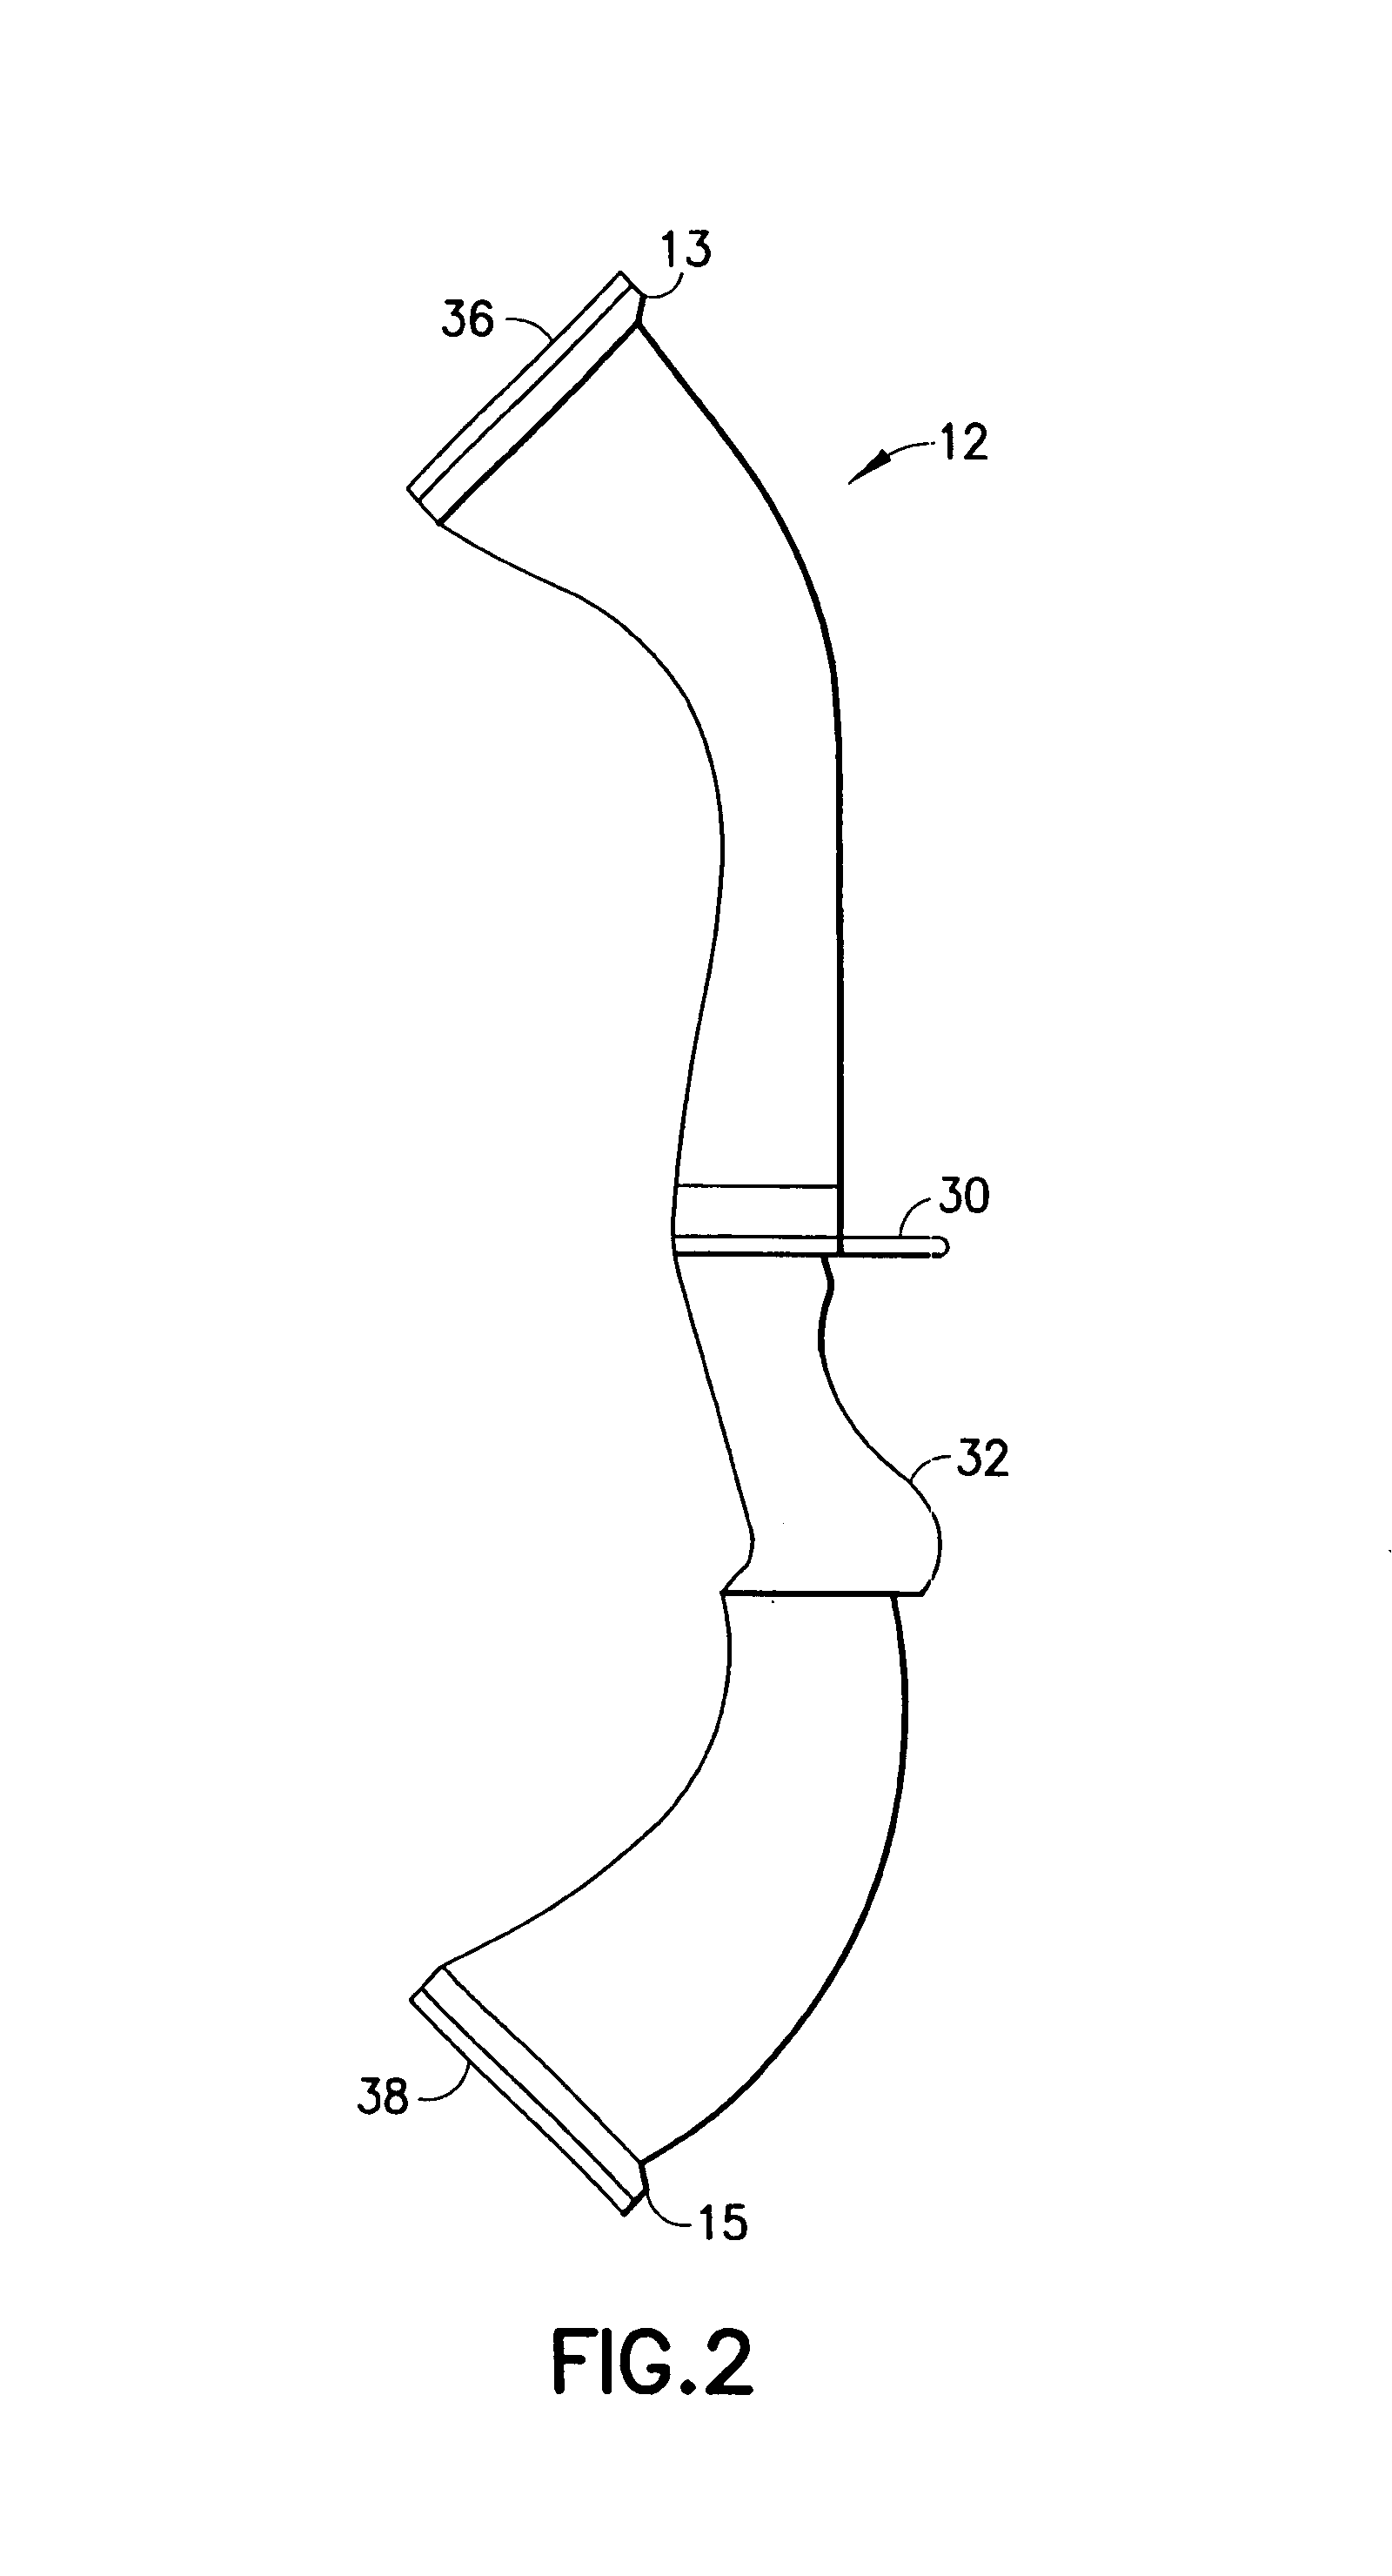 Thermoplastic composite bow riser, limb, and cam